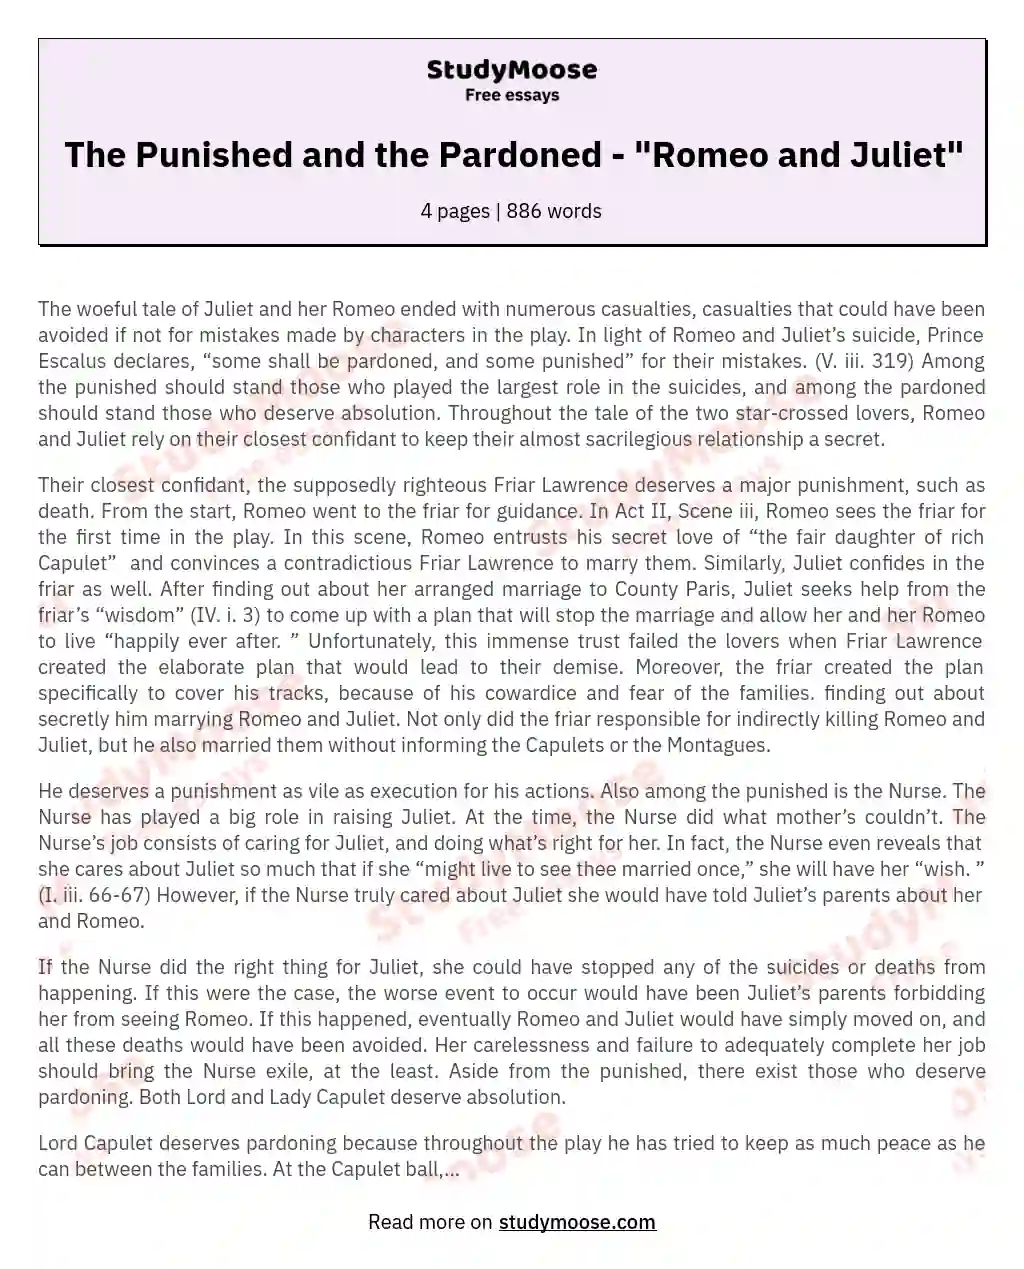 The Punished and the Pardoned - "Romeo and Juliet" essay